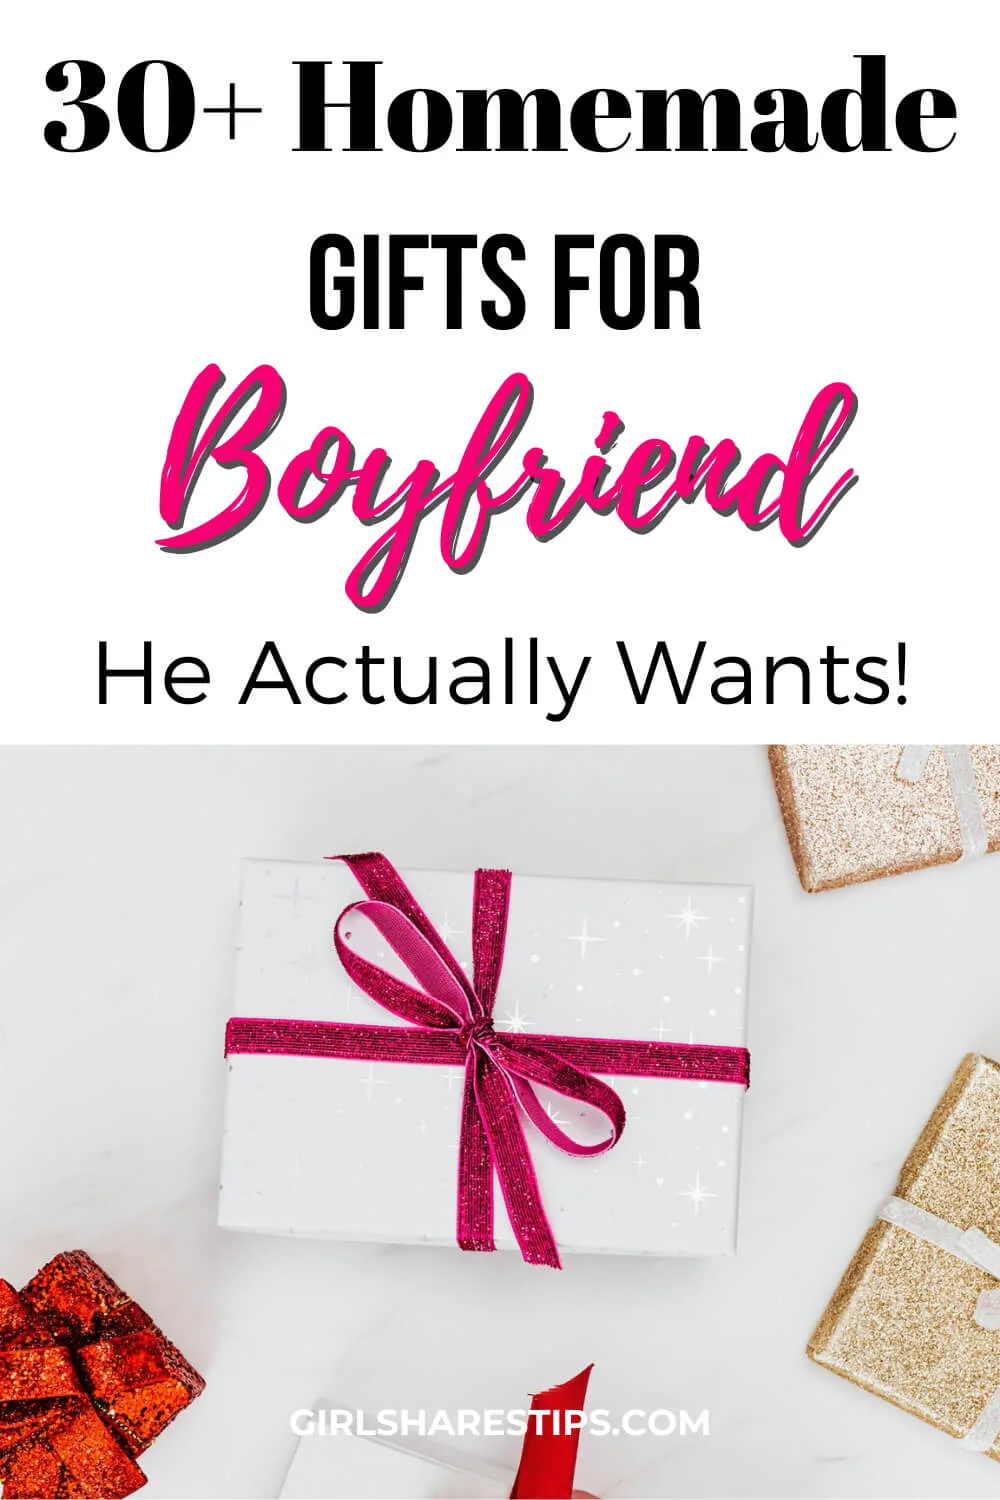 30+ Romantic Homemade Gifts For Boyfriend That He Actually Wants (With  Video Tutorials!) - Girl Shares Tips